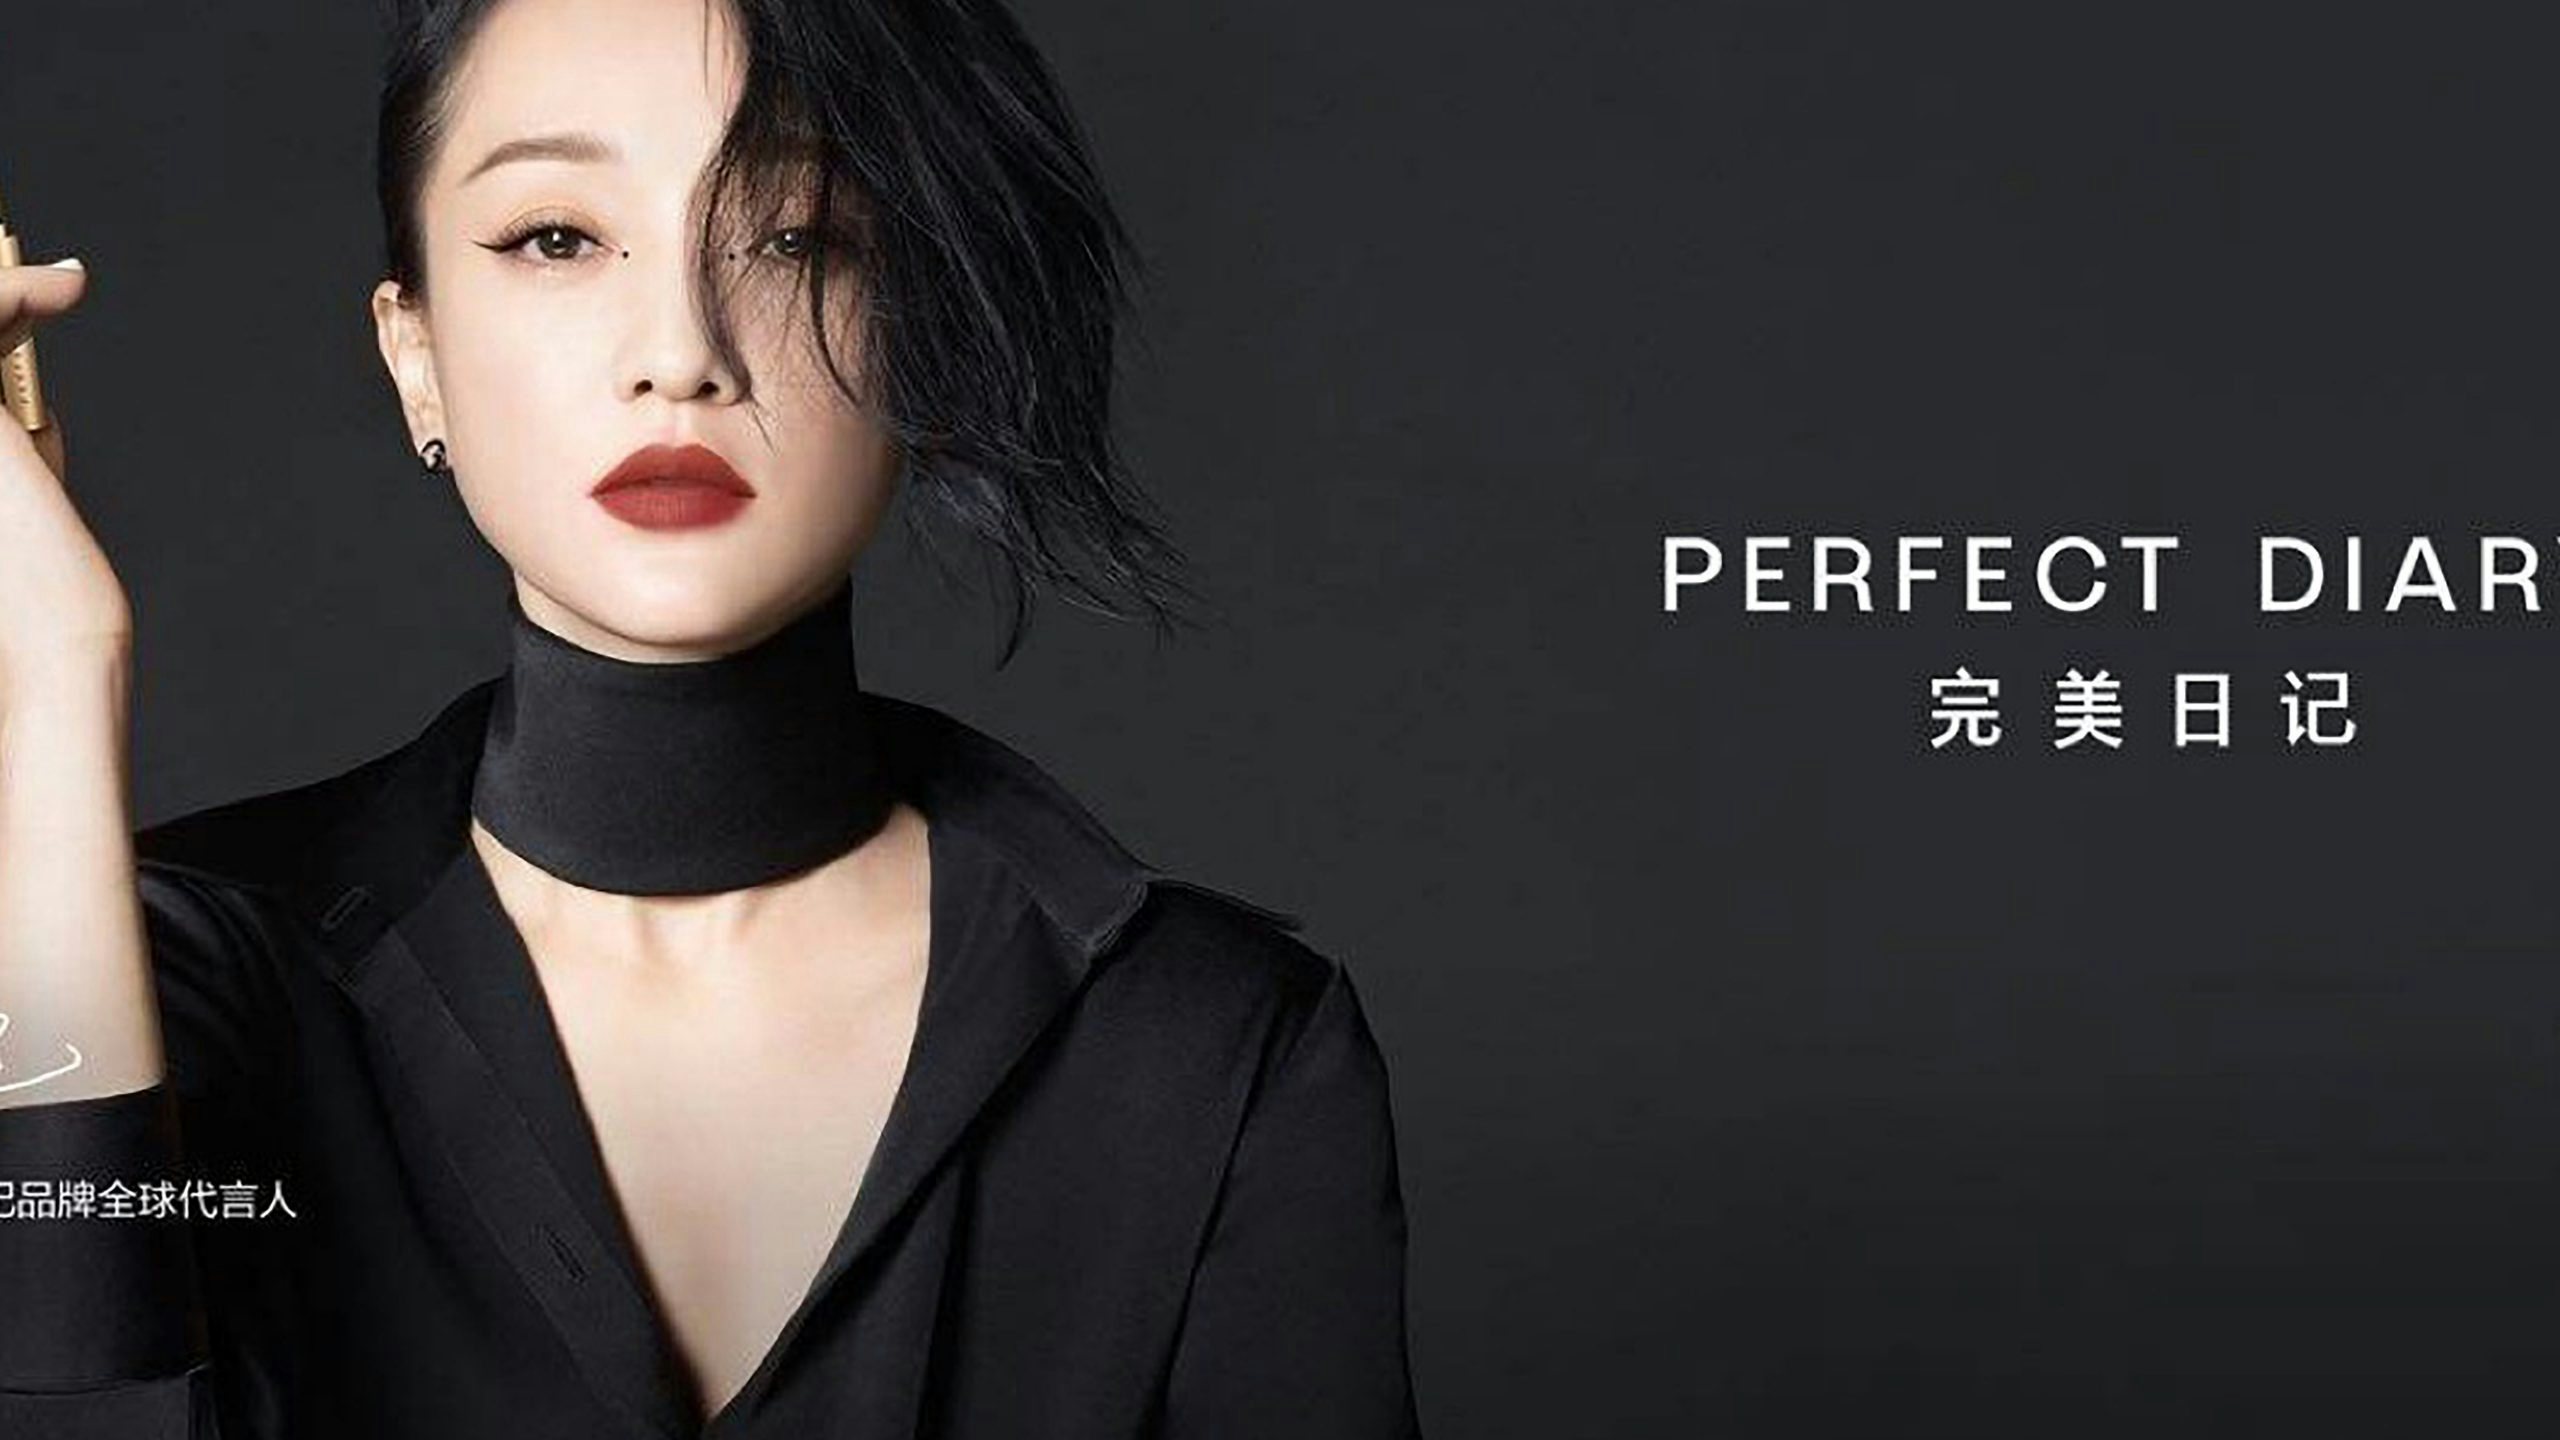 Chinese domestic beauty brand Perfect Diary announced that actress Zhou Xun would be its first global spokesperson since the brand’s debut three years ago. Photo: Perfect Diary